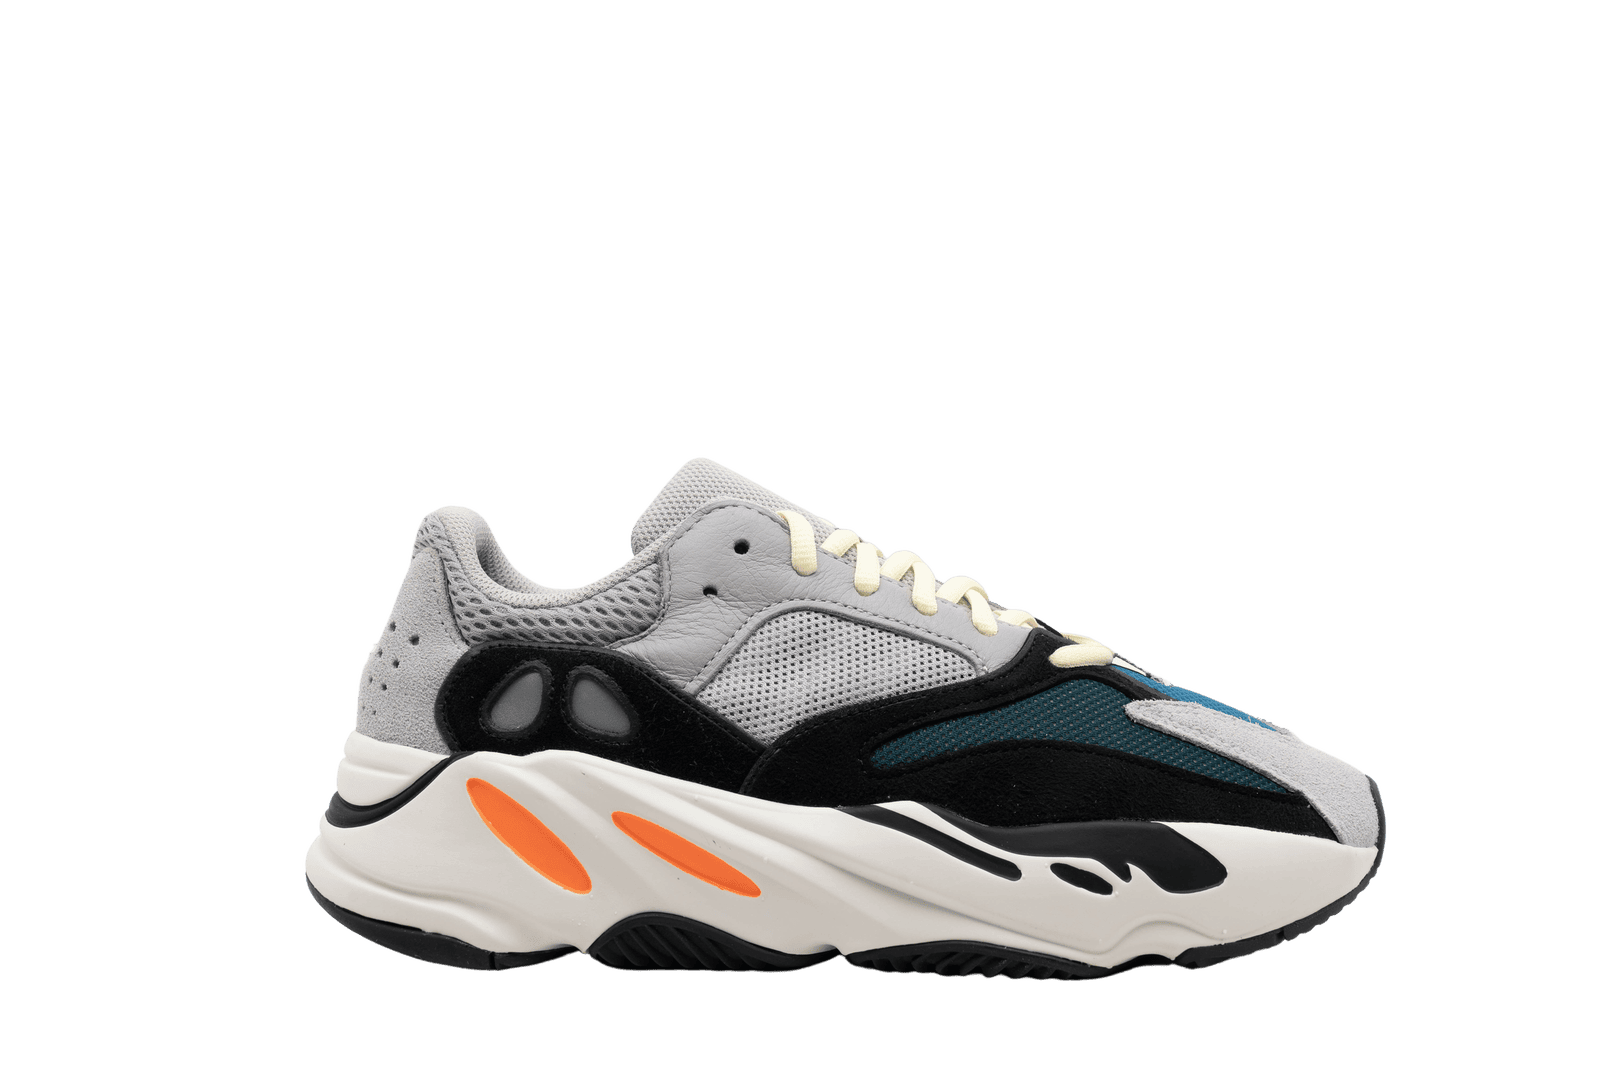 yeezy 700s shoes